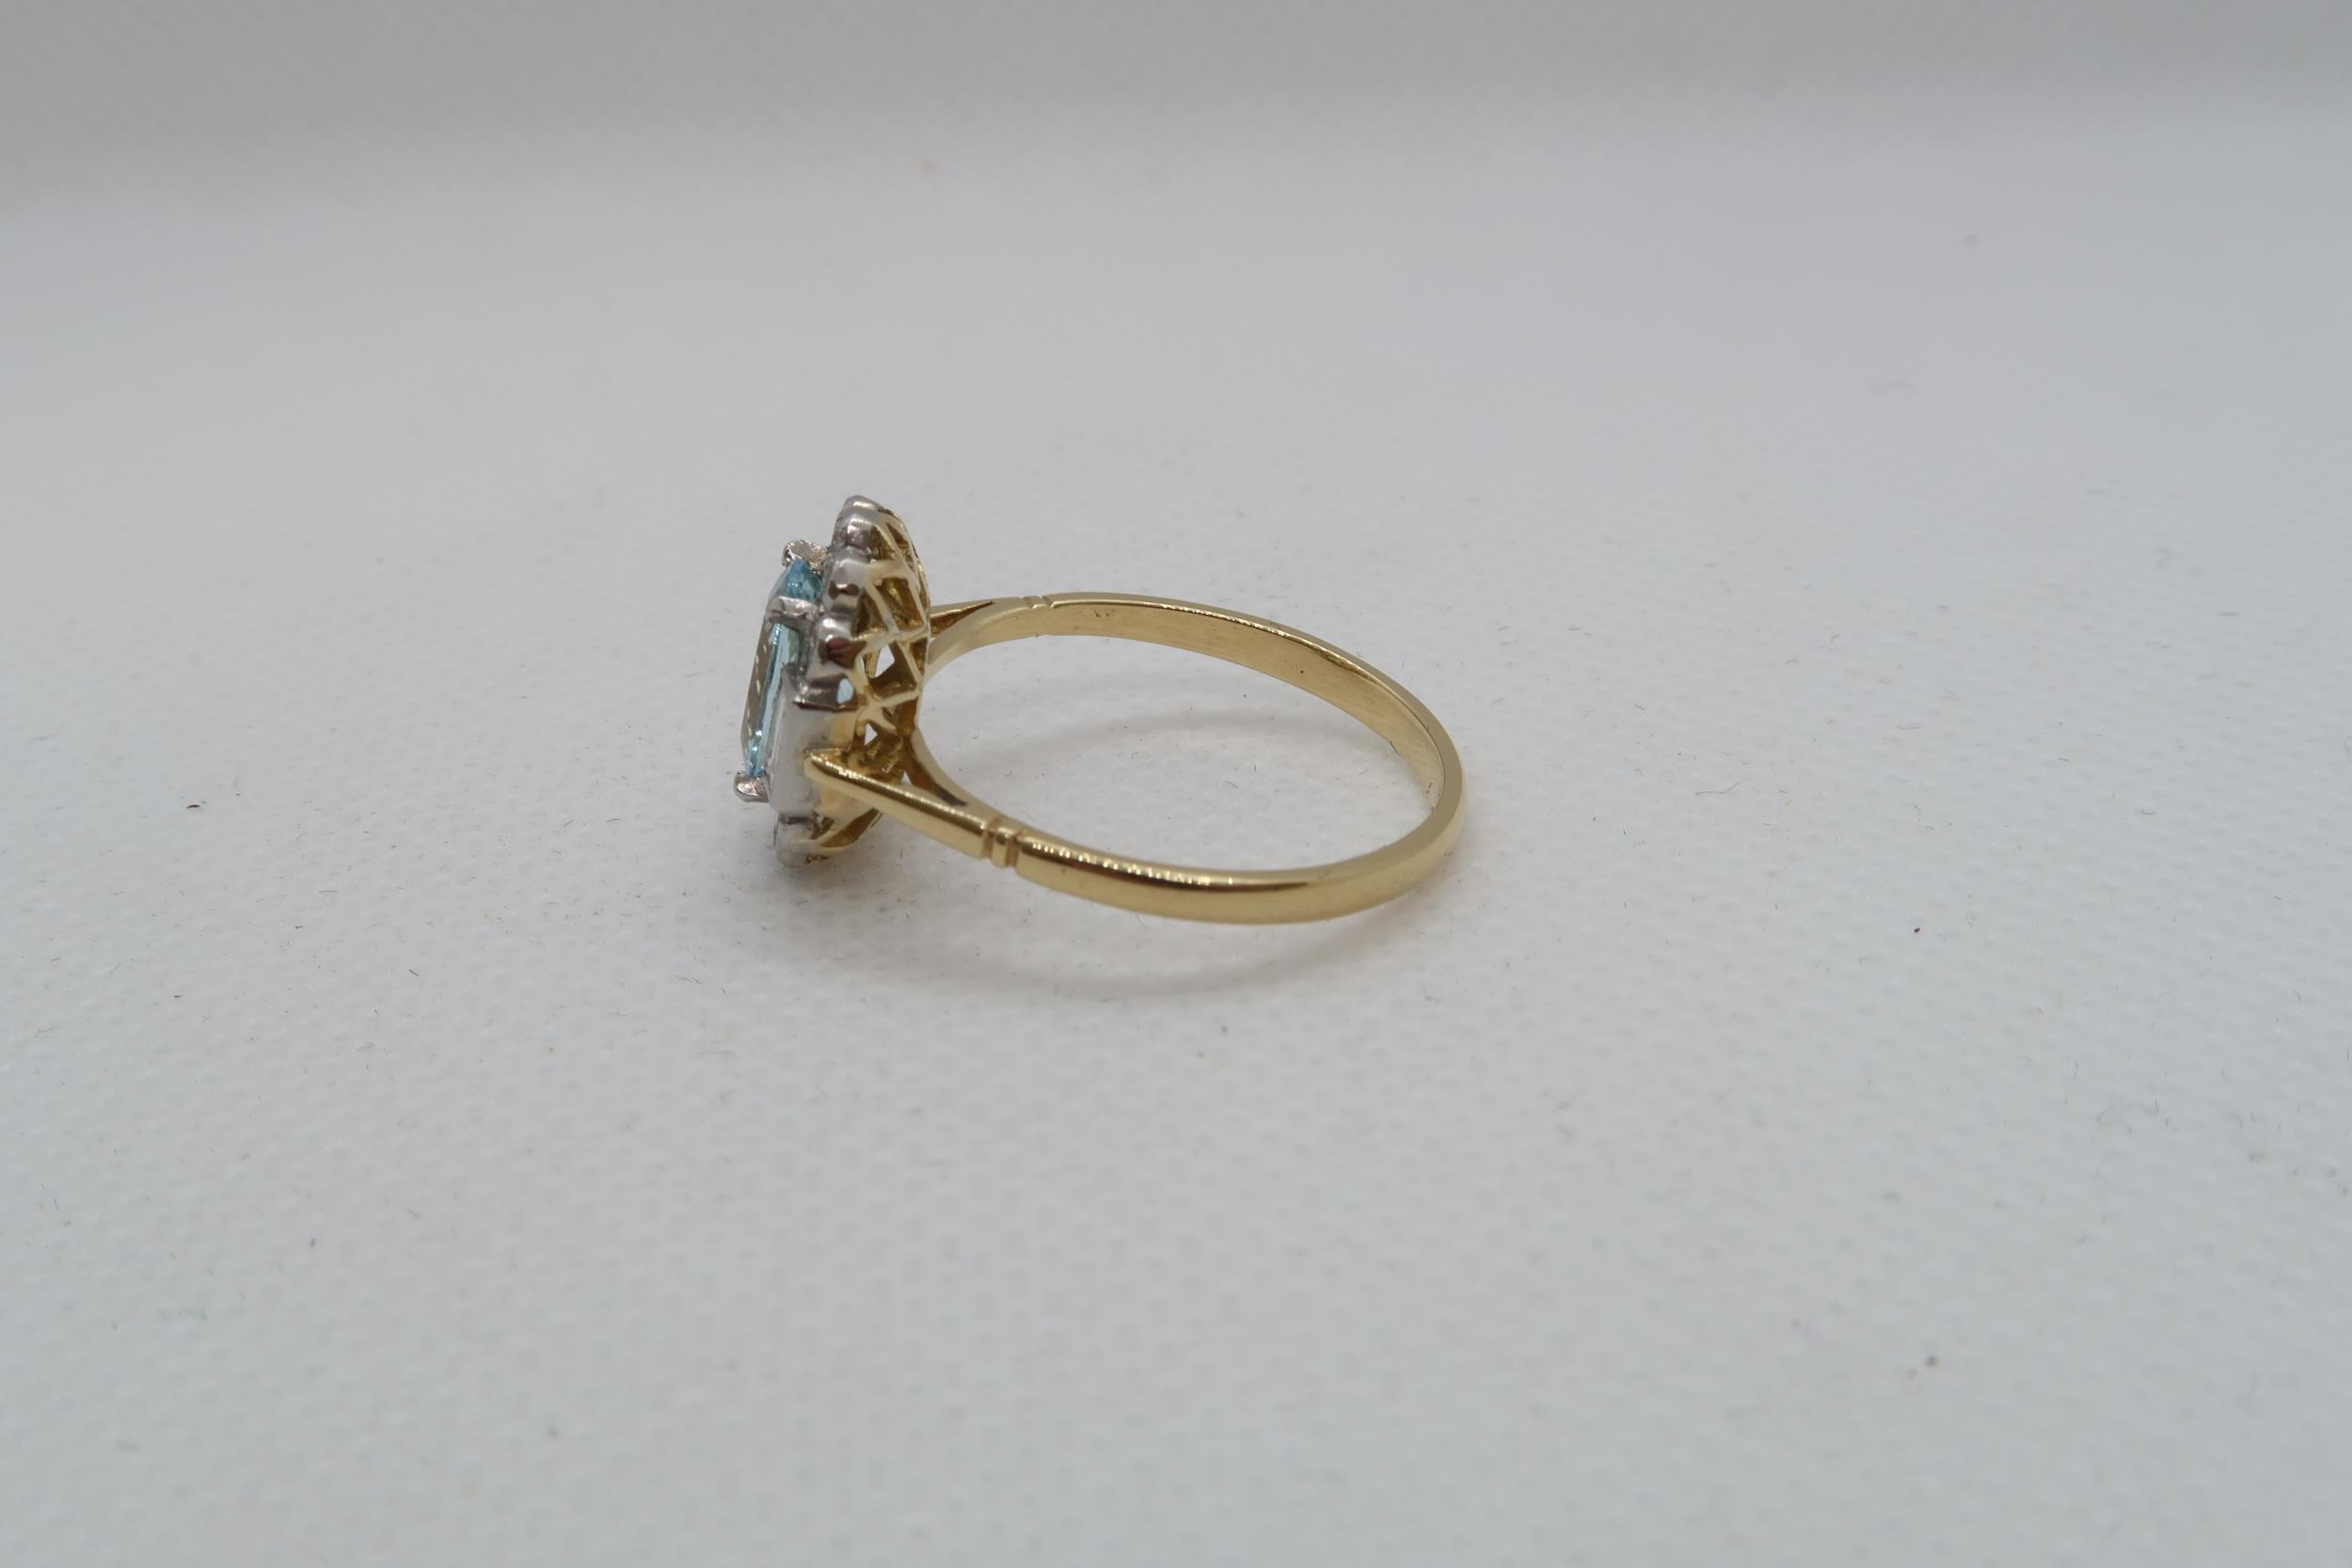 An 18ct yellow gold and platinum Art Deco style aquamarine and diamond ring - diamonds are bright - Image 4 of 4